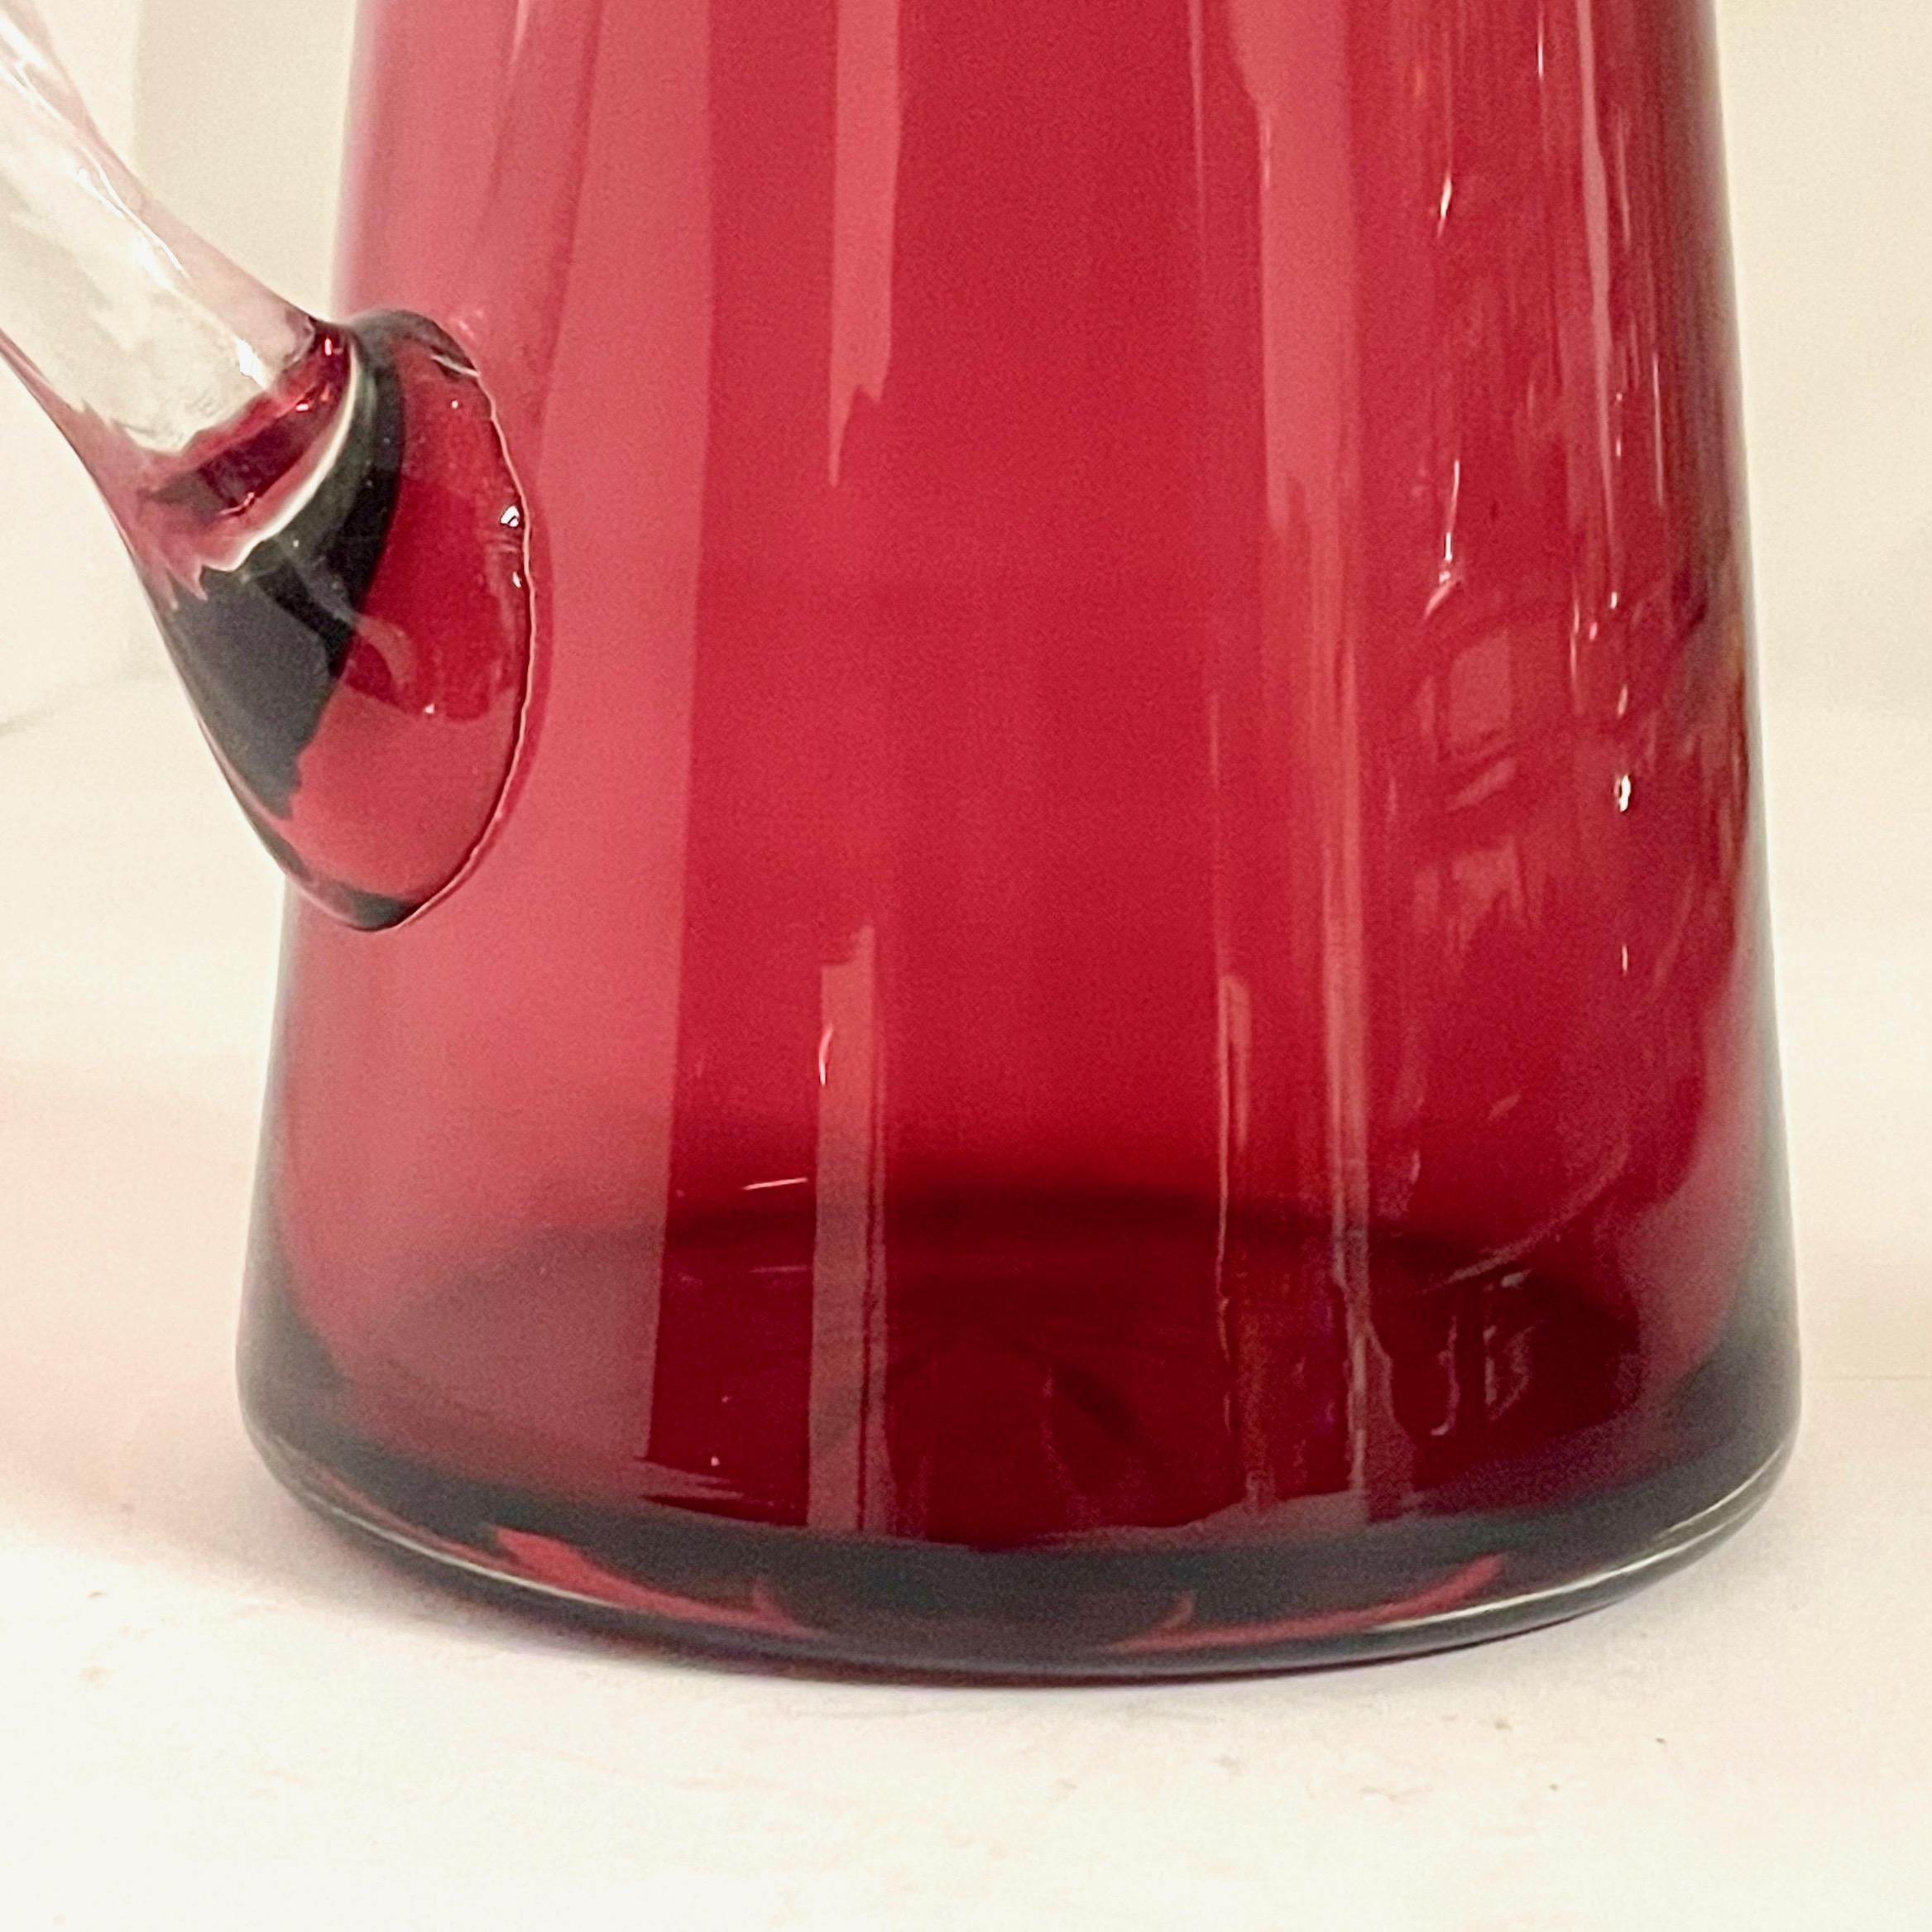 Cranberry Glass Jug by Heath & Middleton, 1907 For Sale 2